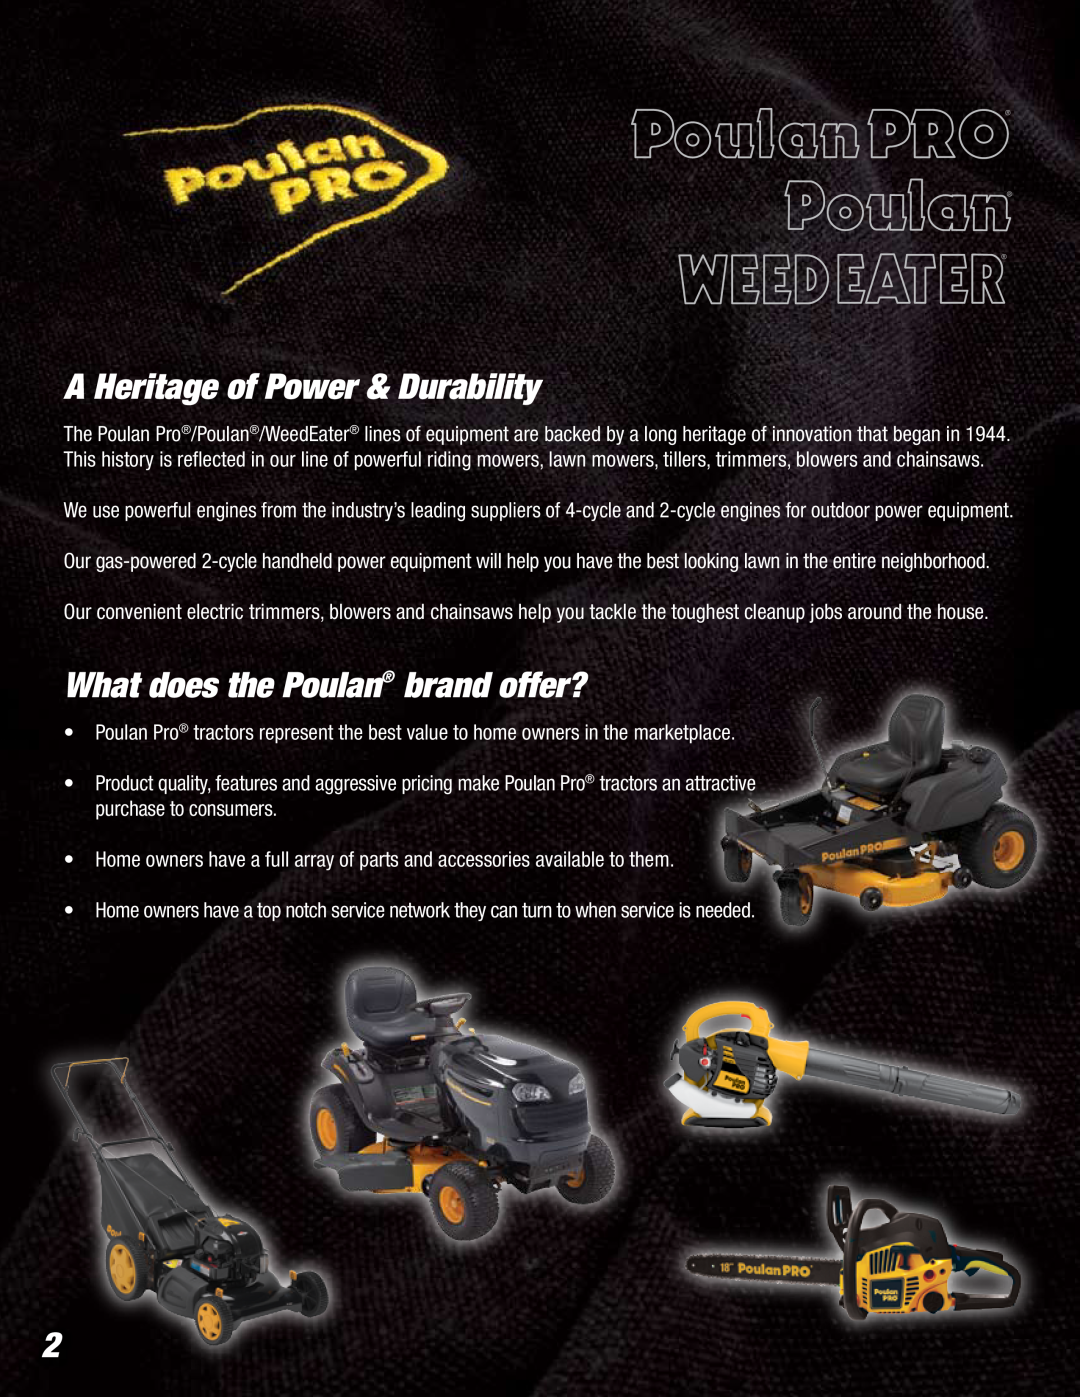 Poulan Lawn & Garden Tractor manual A Heritage of Power & Durability, What does the Poulan brand offer? 